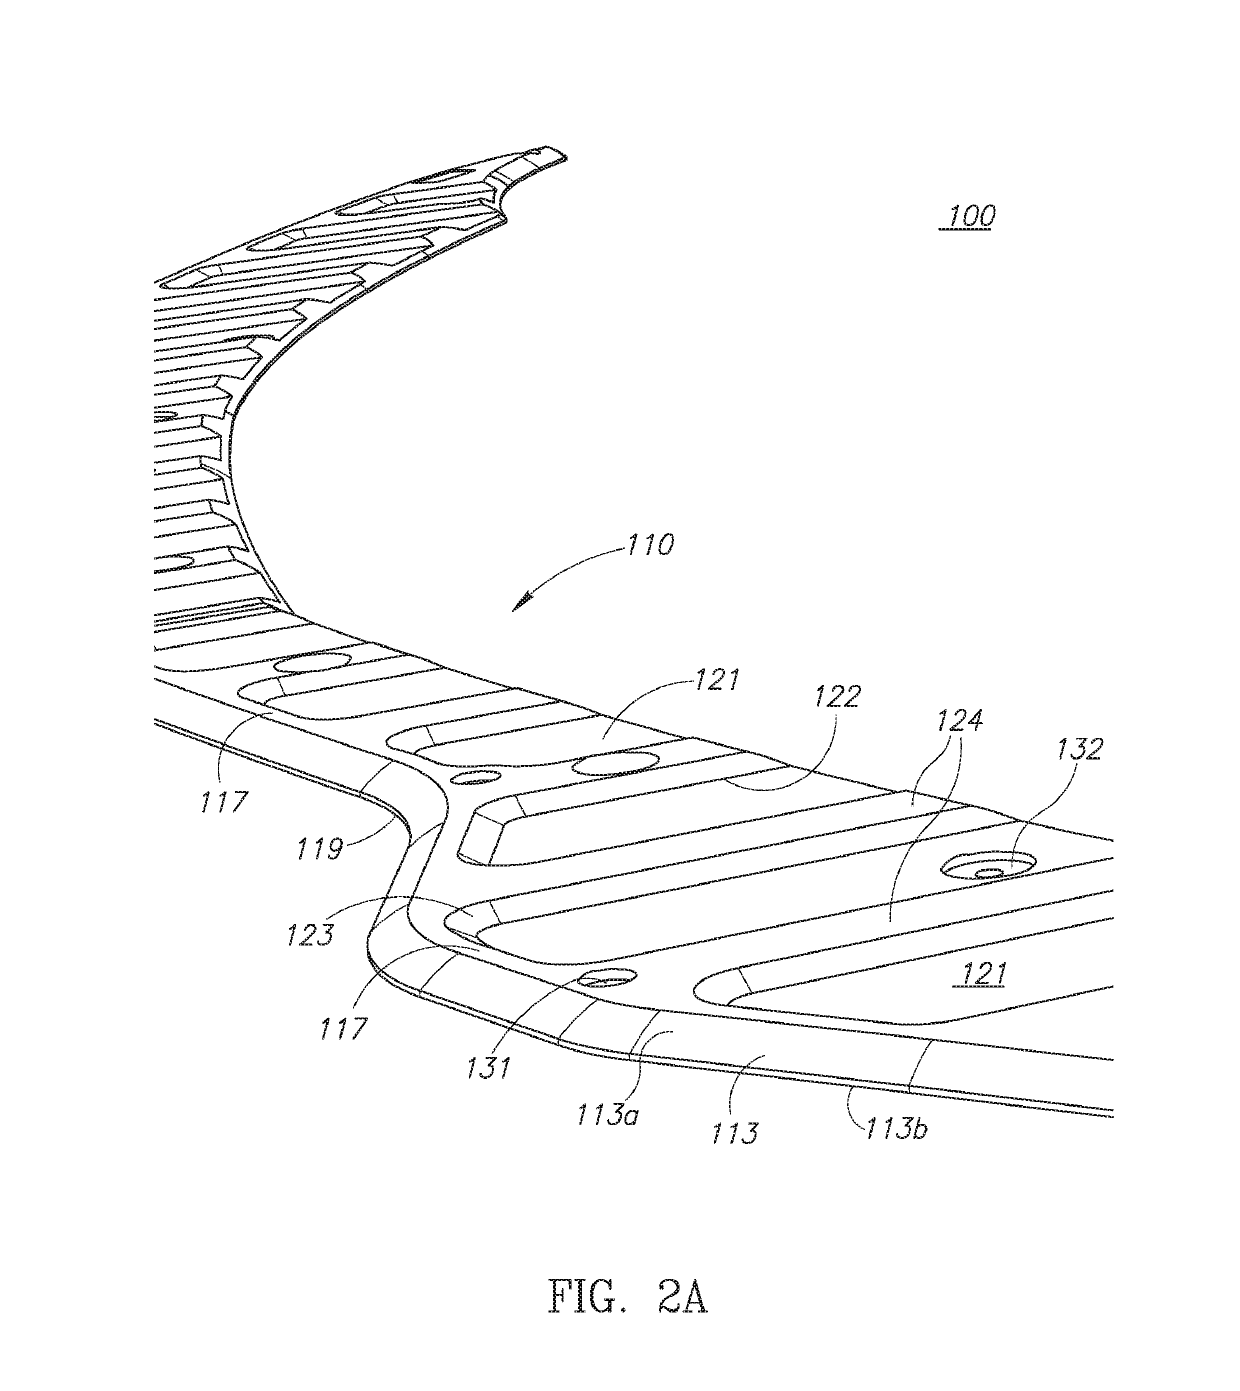 Vehicle protection apparatus